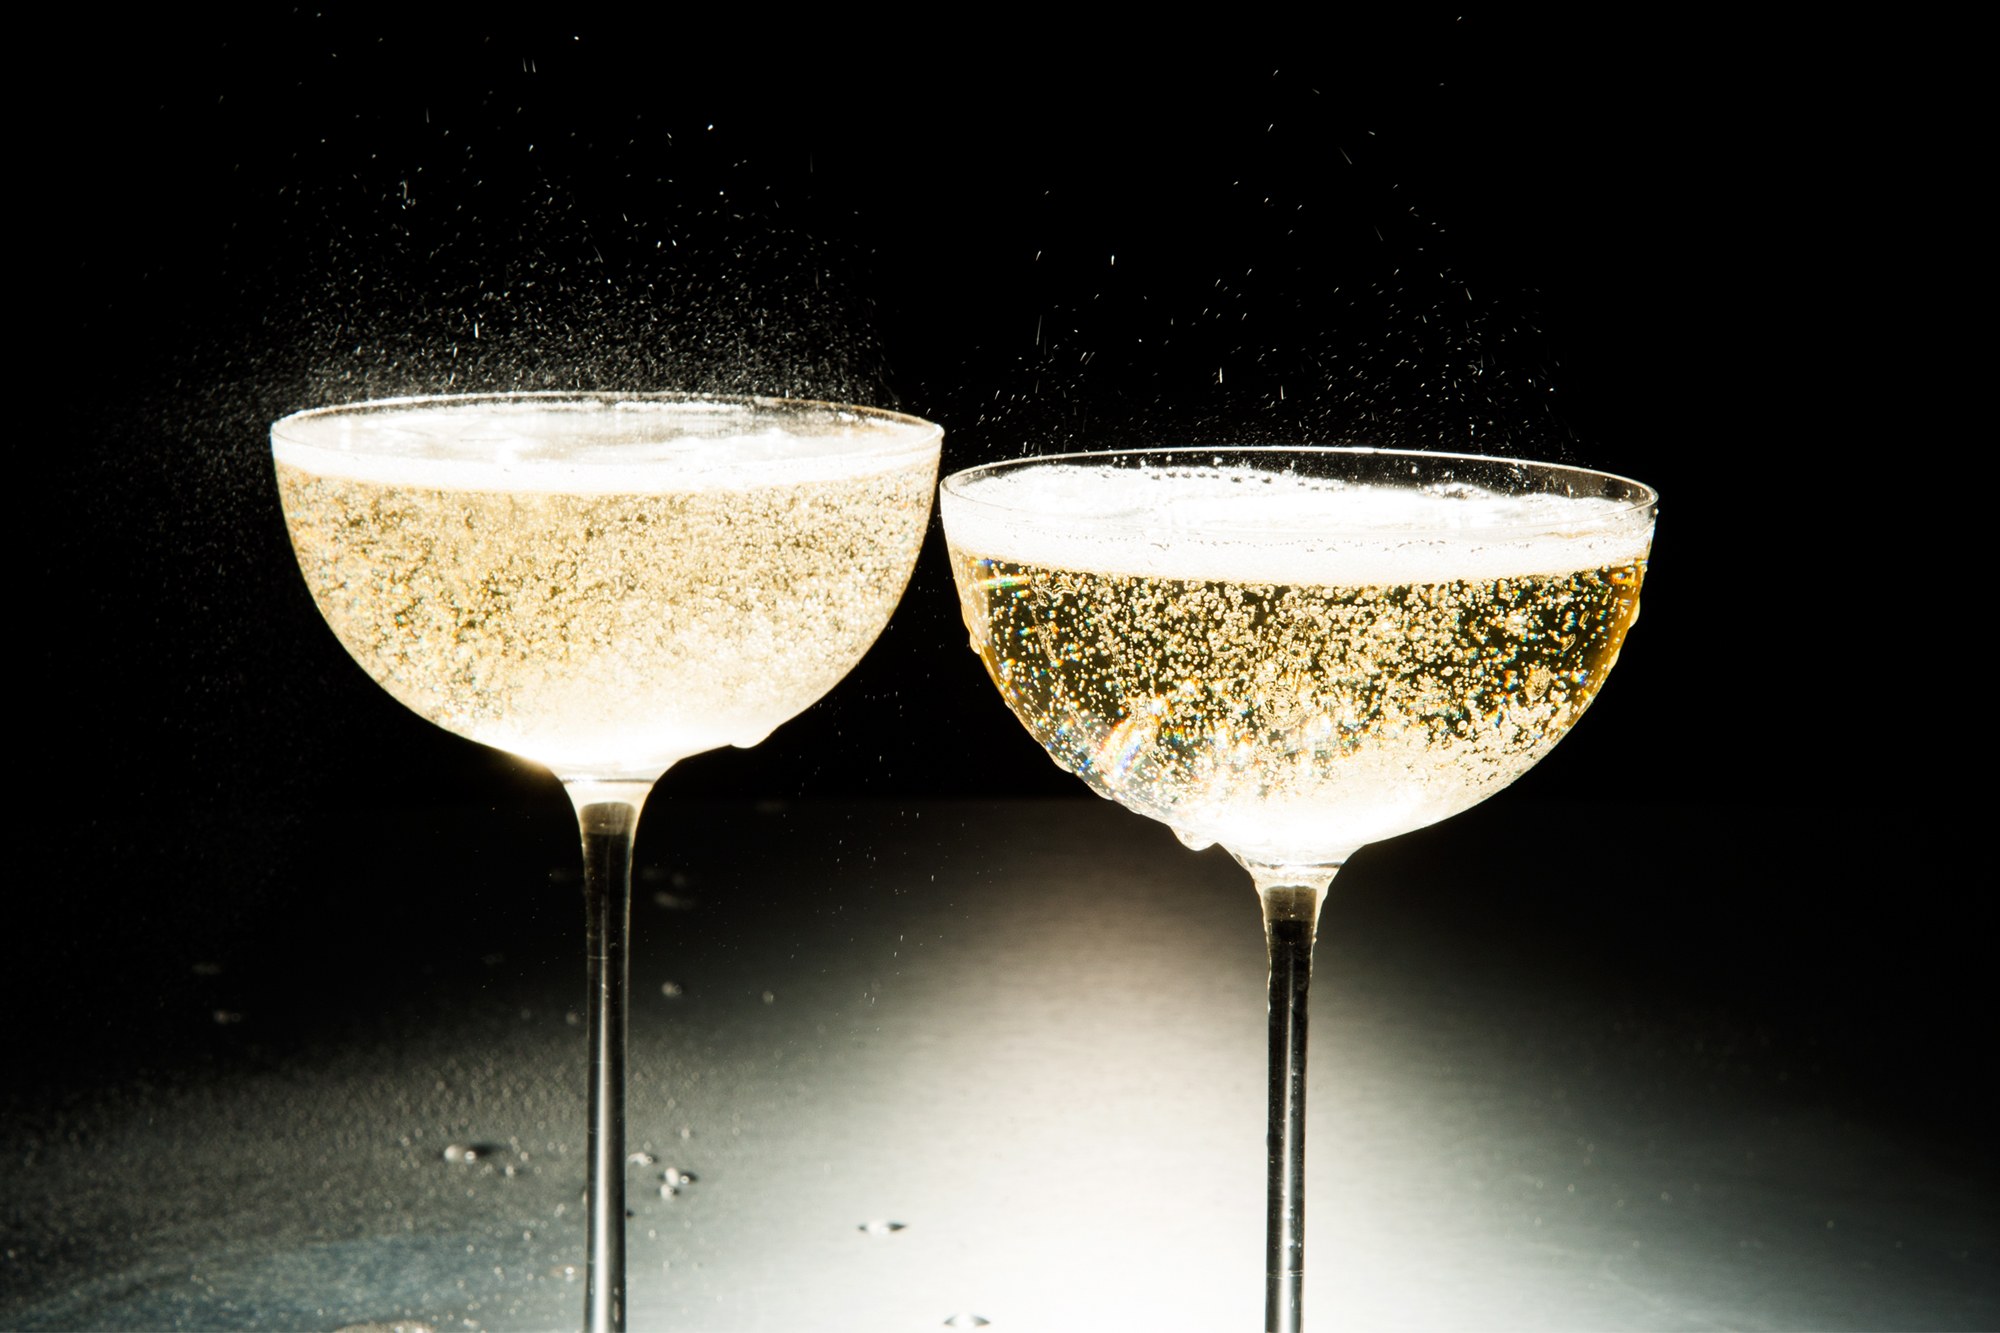 The Best Bubbly Drink for Every Holiday Party Scenario | GQ